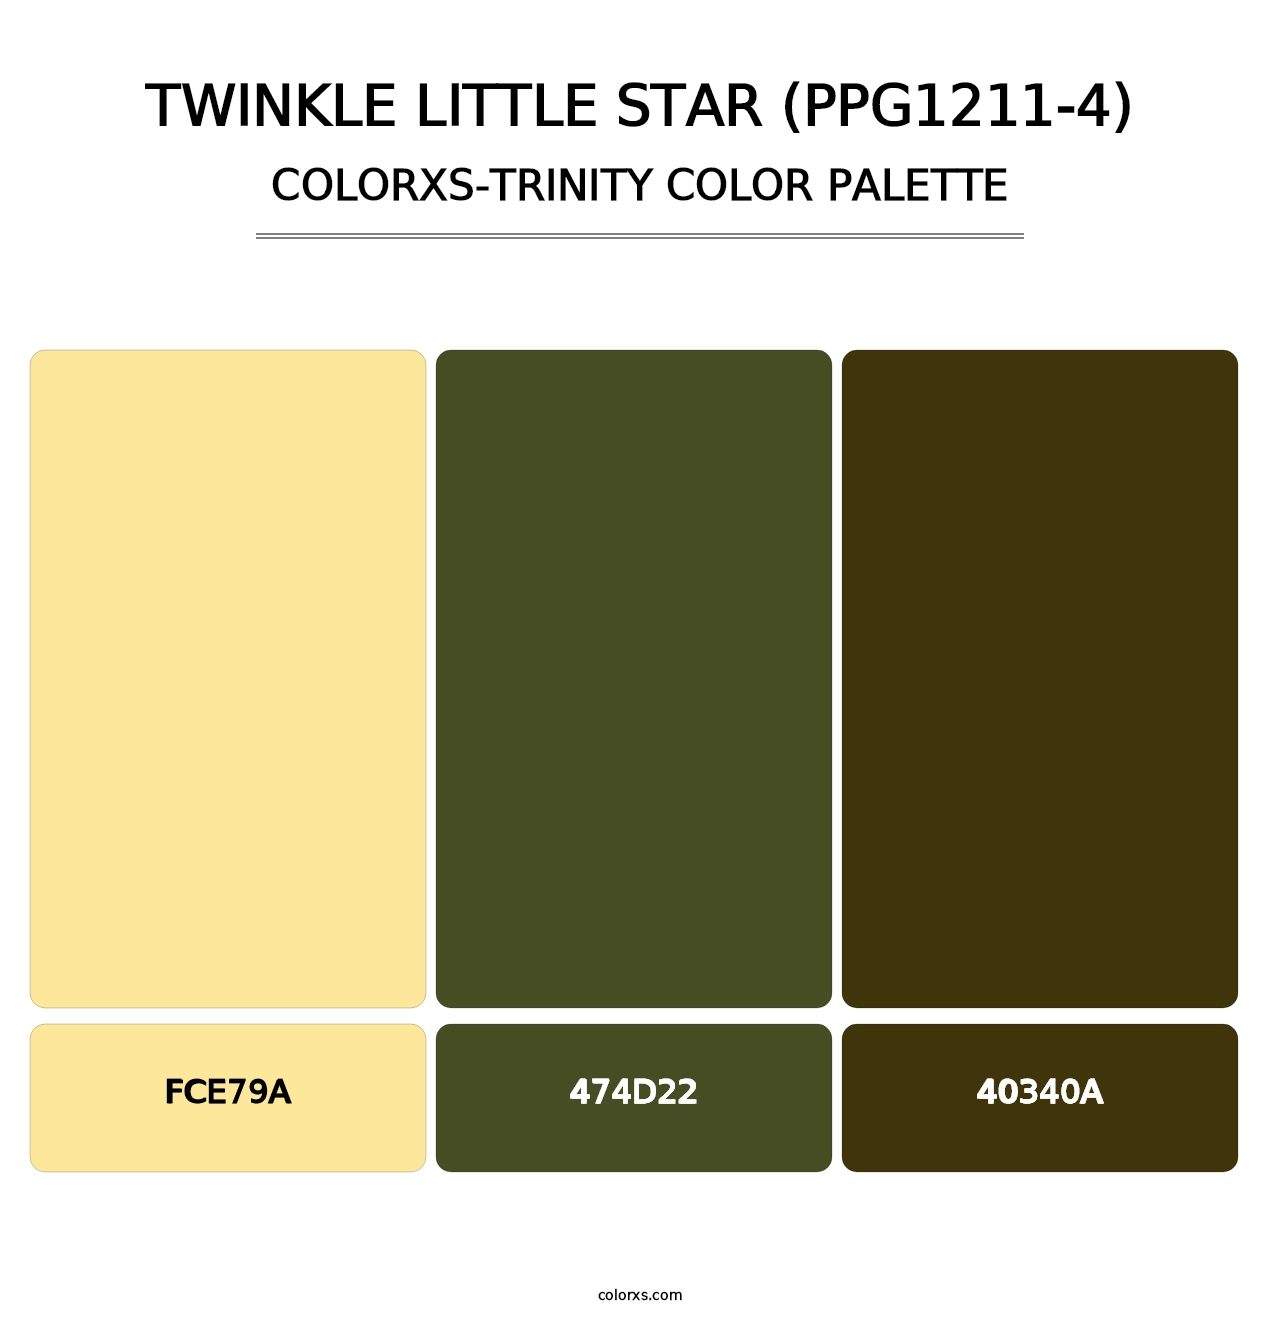 Twinkle Little Star (PPG1211-4) - Colorxs Trinity Palette